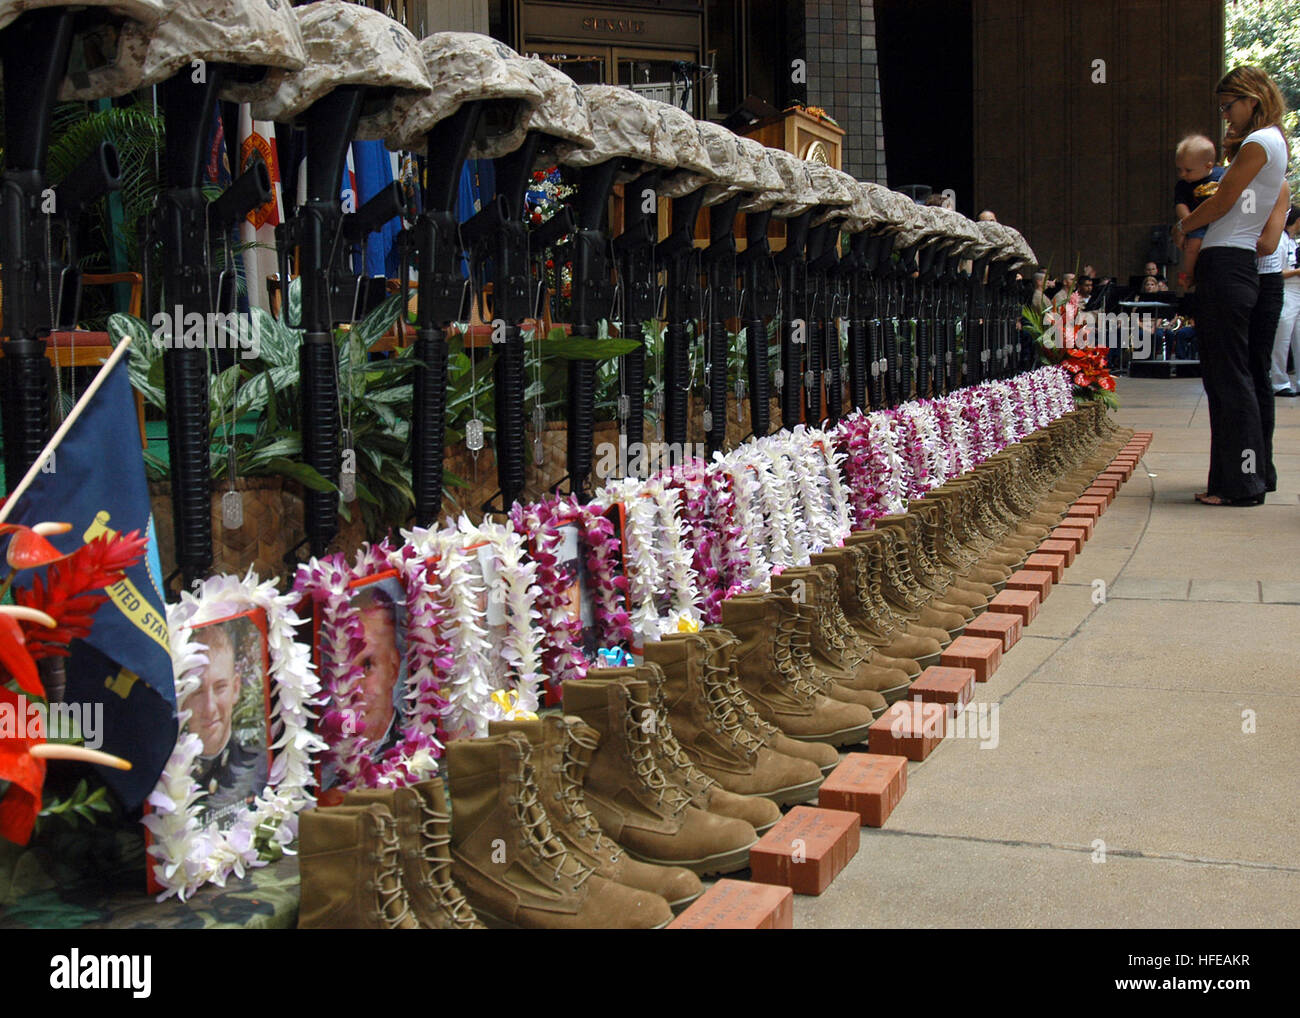 050307-N-3019M-003 Pearl Harbor, Hawaii (Mar. 7, 2005) - A family member reflects in front of a ceremonial formation of U.S. Marine Corps infantry equipment during the First Battalion, Third MarineÕs Memorial Service at the Hawaii State Capitol Building in Pearl Harbor, Hawaii. The memorial honored the 27 Marines and one Sailor who died in a helicopter crash near Ar Rutbah, Iraq on Jan. 26, 2005. The memorial service included remarks by Governor Linda Lingle (R-HI) and Commander, U.S. Marine Forces, Pacific, Lt. Gen. Wallace C. Gregson Jr, a two-bell ceremony and a rifle volley by the Marine C Stock Photo